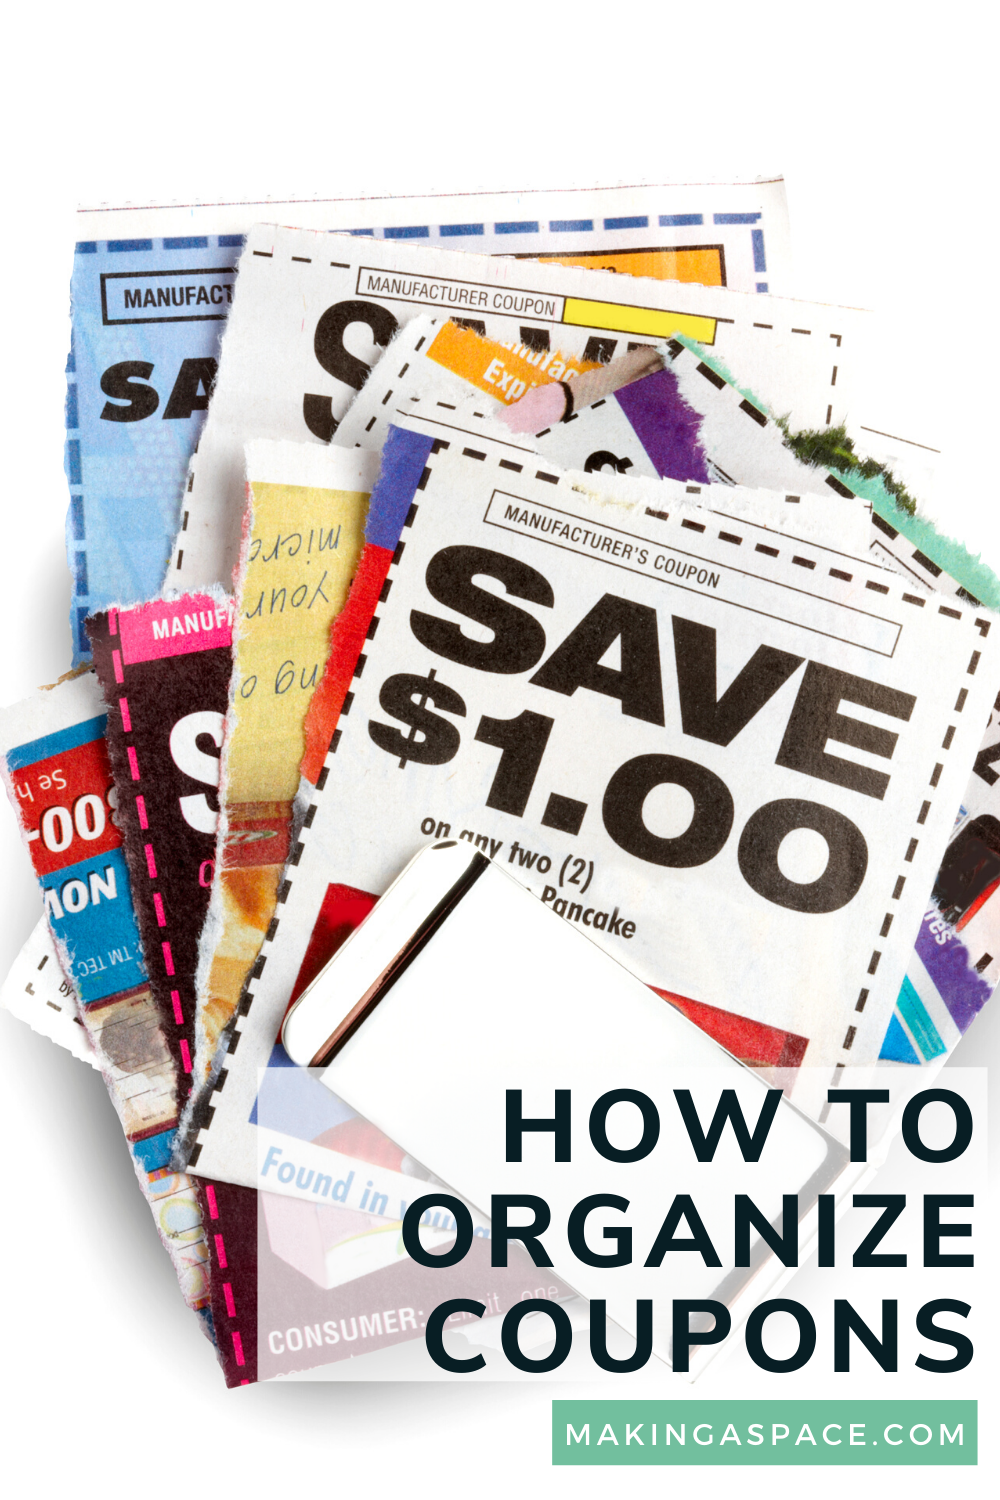 How to Organize Coupons